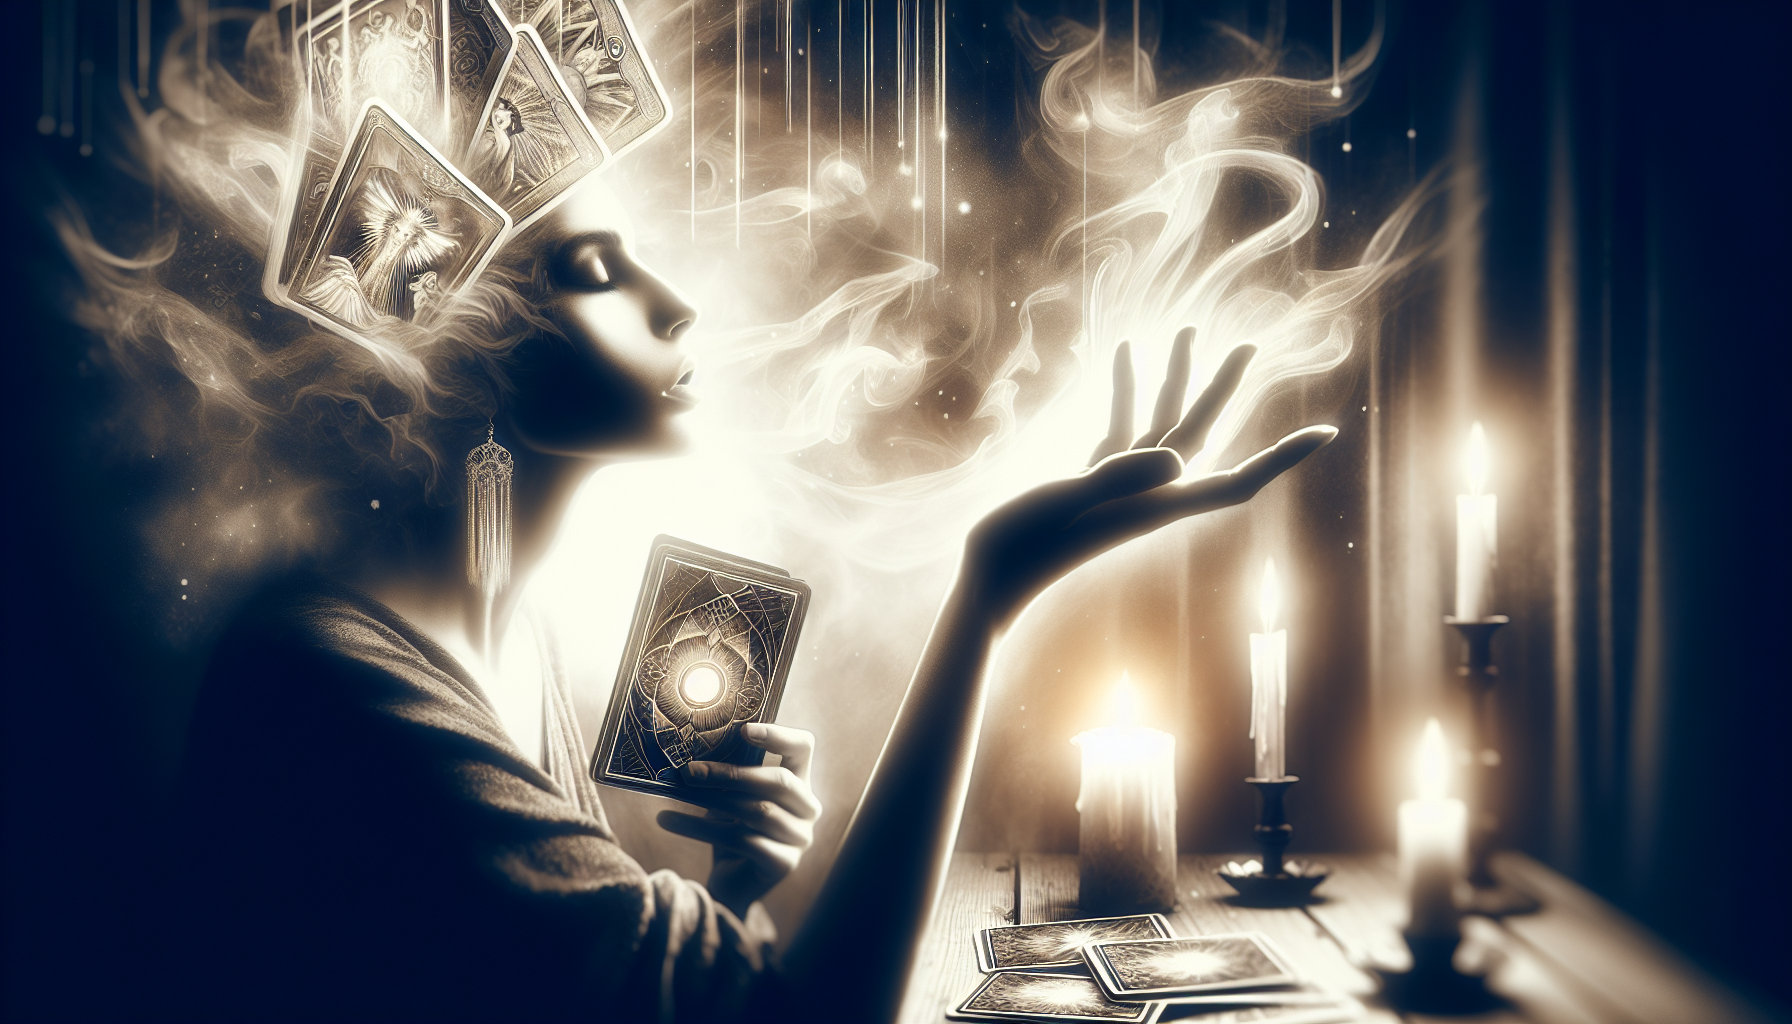 Artistic representation of intuition and guidance in tarot readings